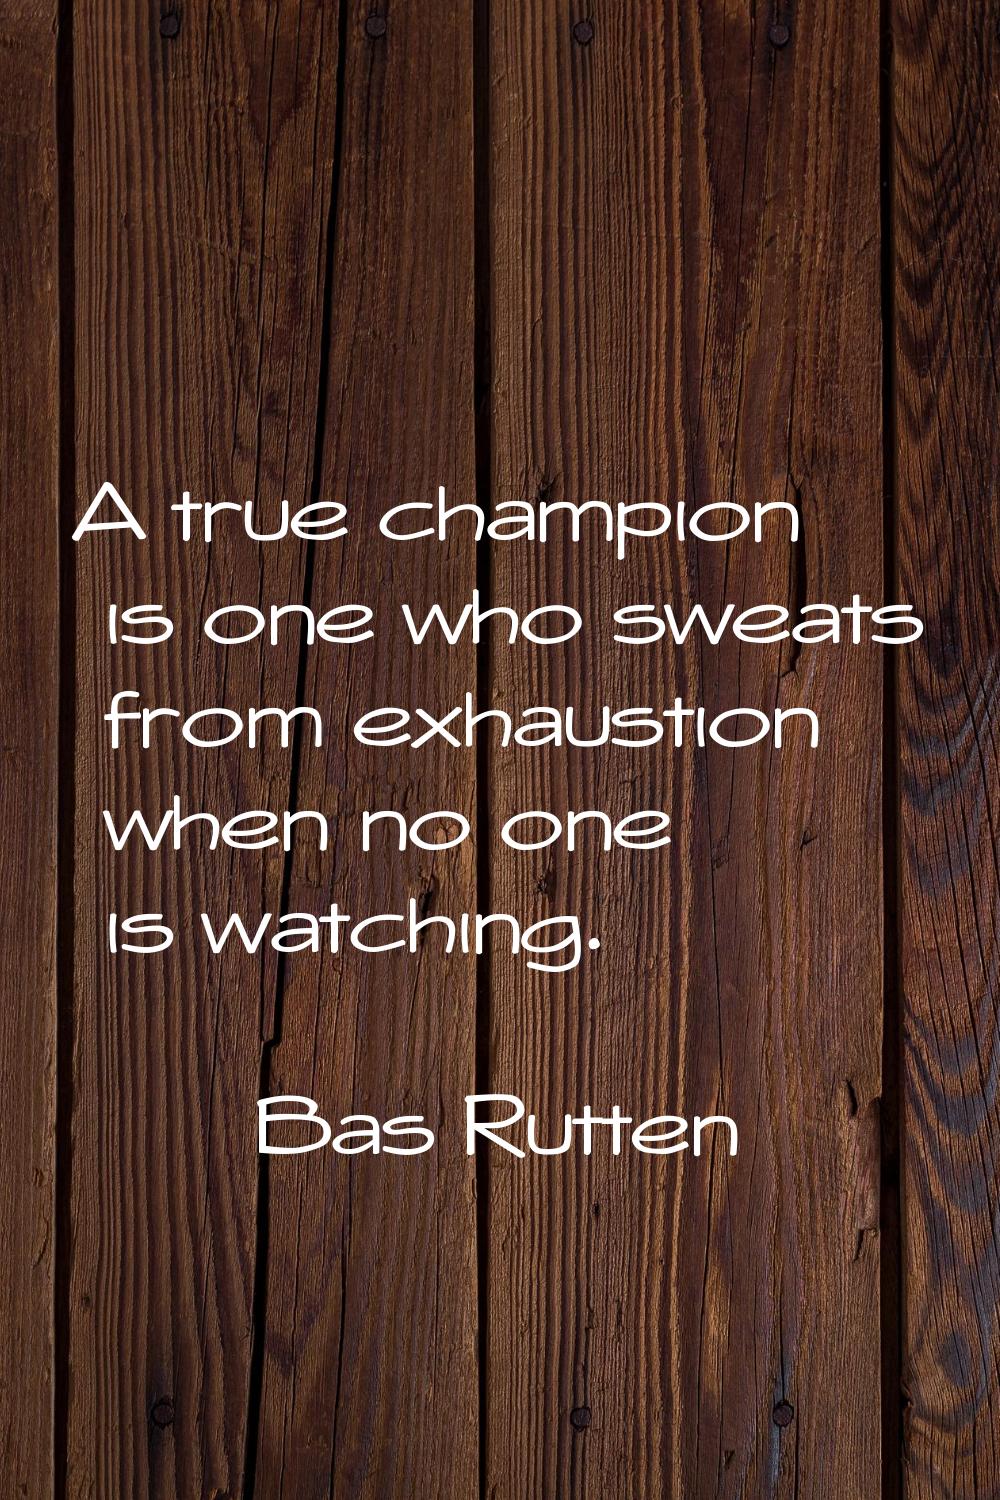 A true champion is one who sweats from exhaustion when no one is watching.